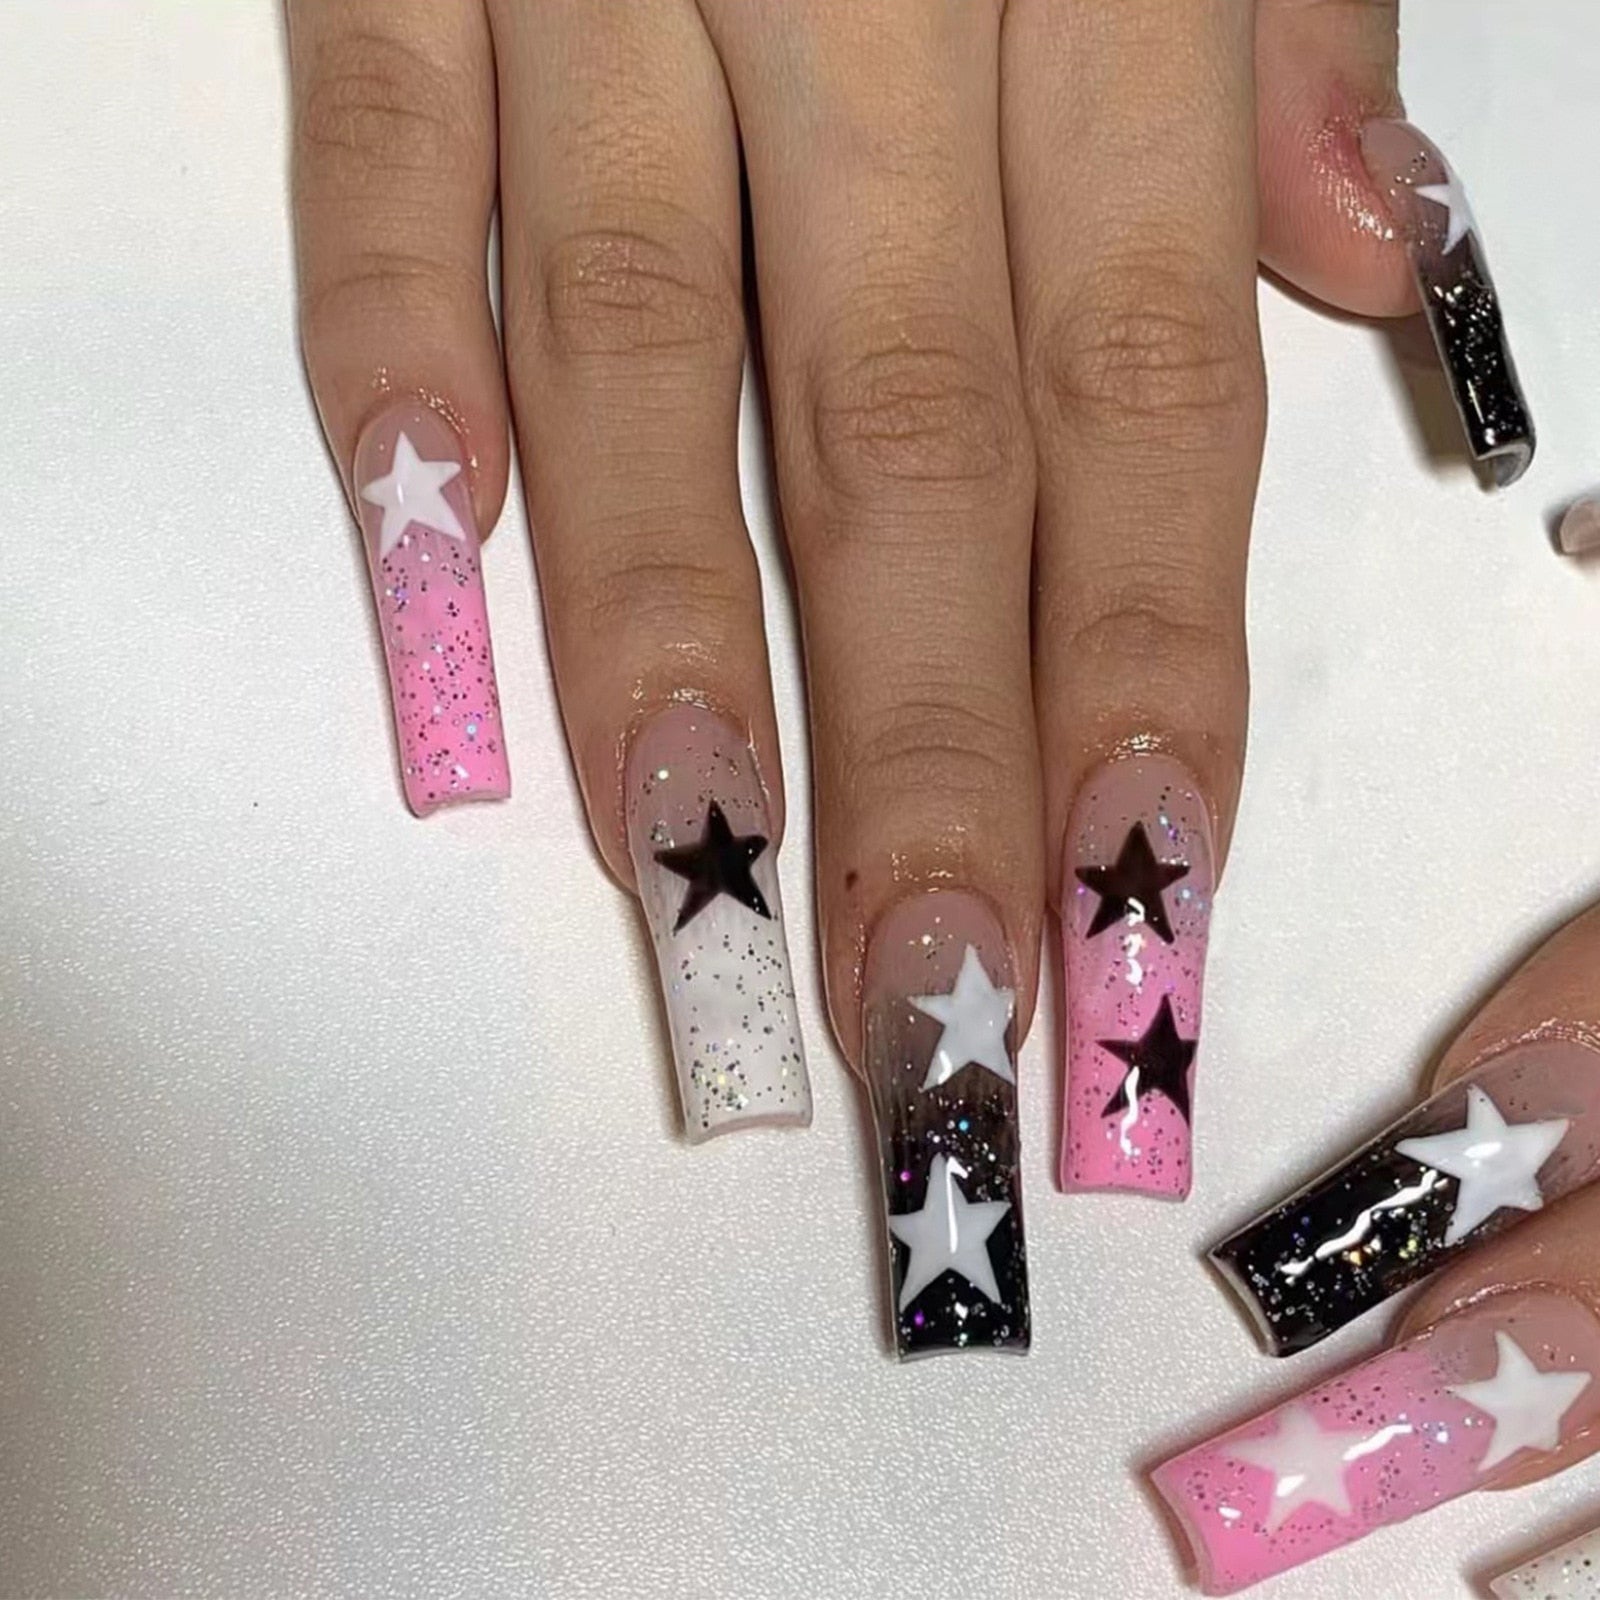 24pcs y2k Fake Nails Black White Star Printed Press on Nail Tips Long Coffin European Artificial Nail Patch for Girl Women Basso & Brooke